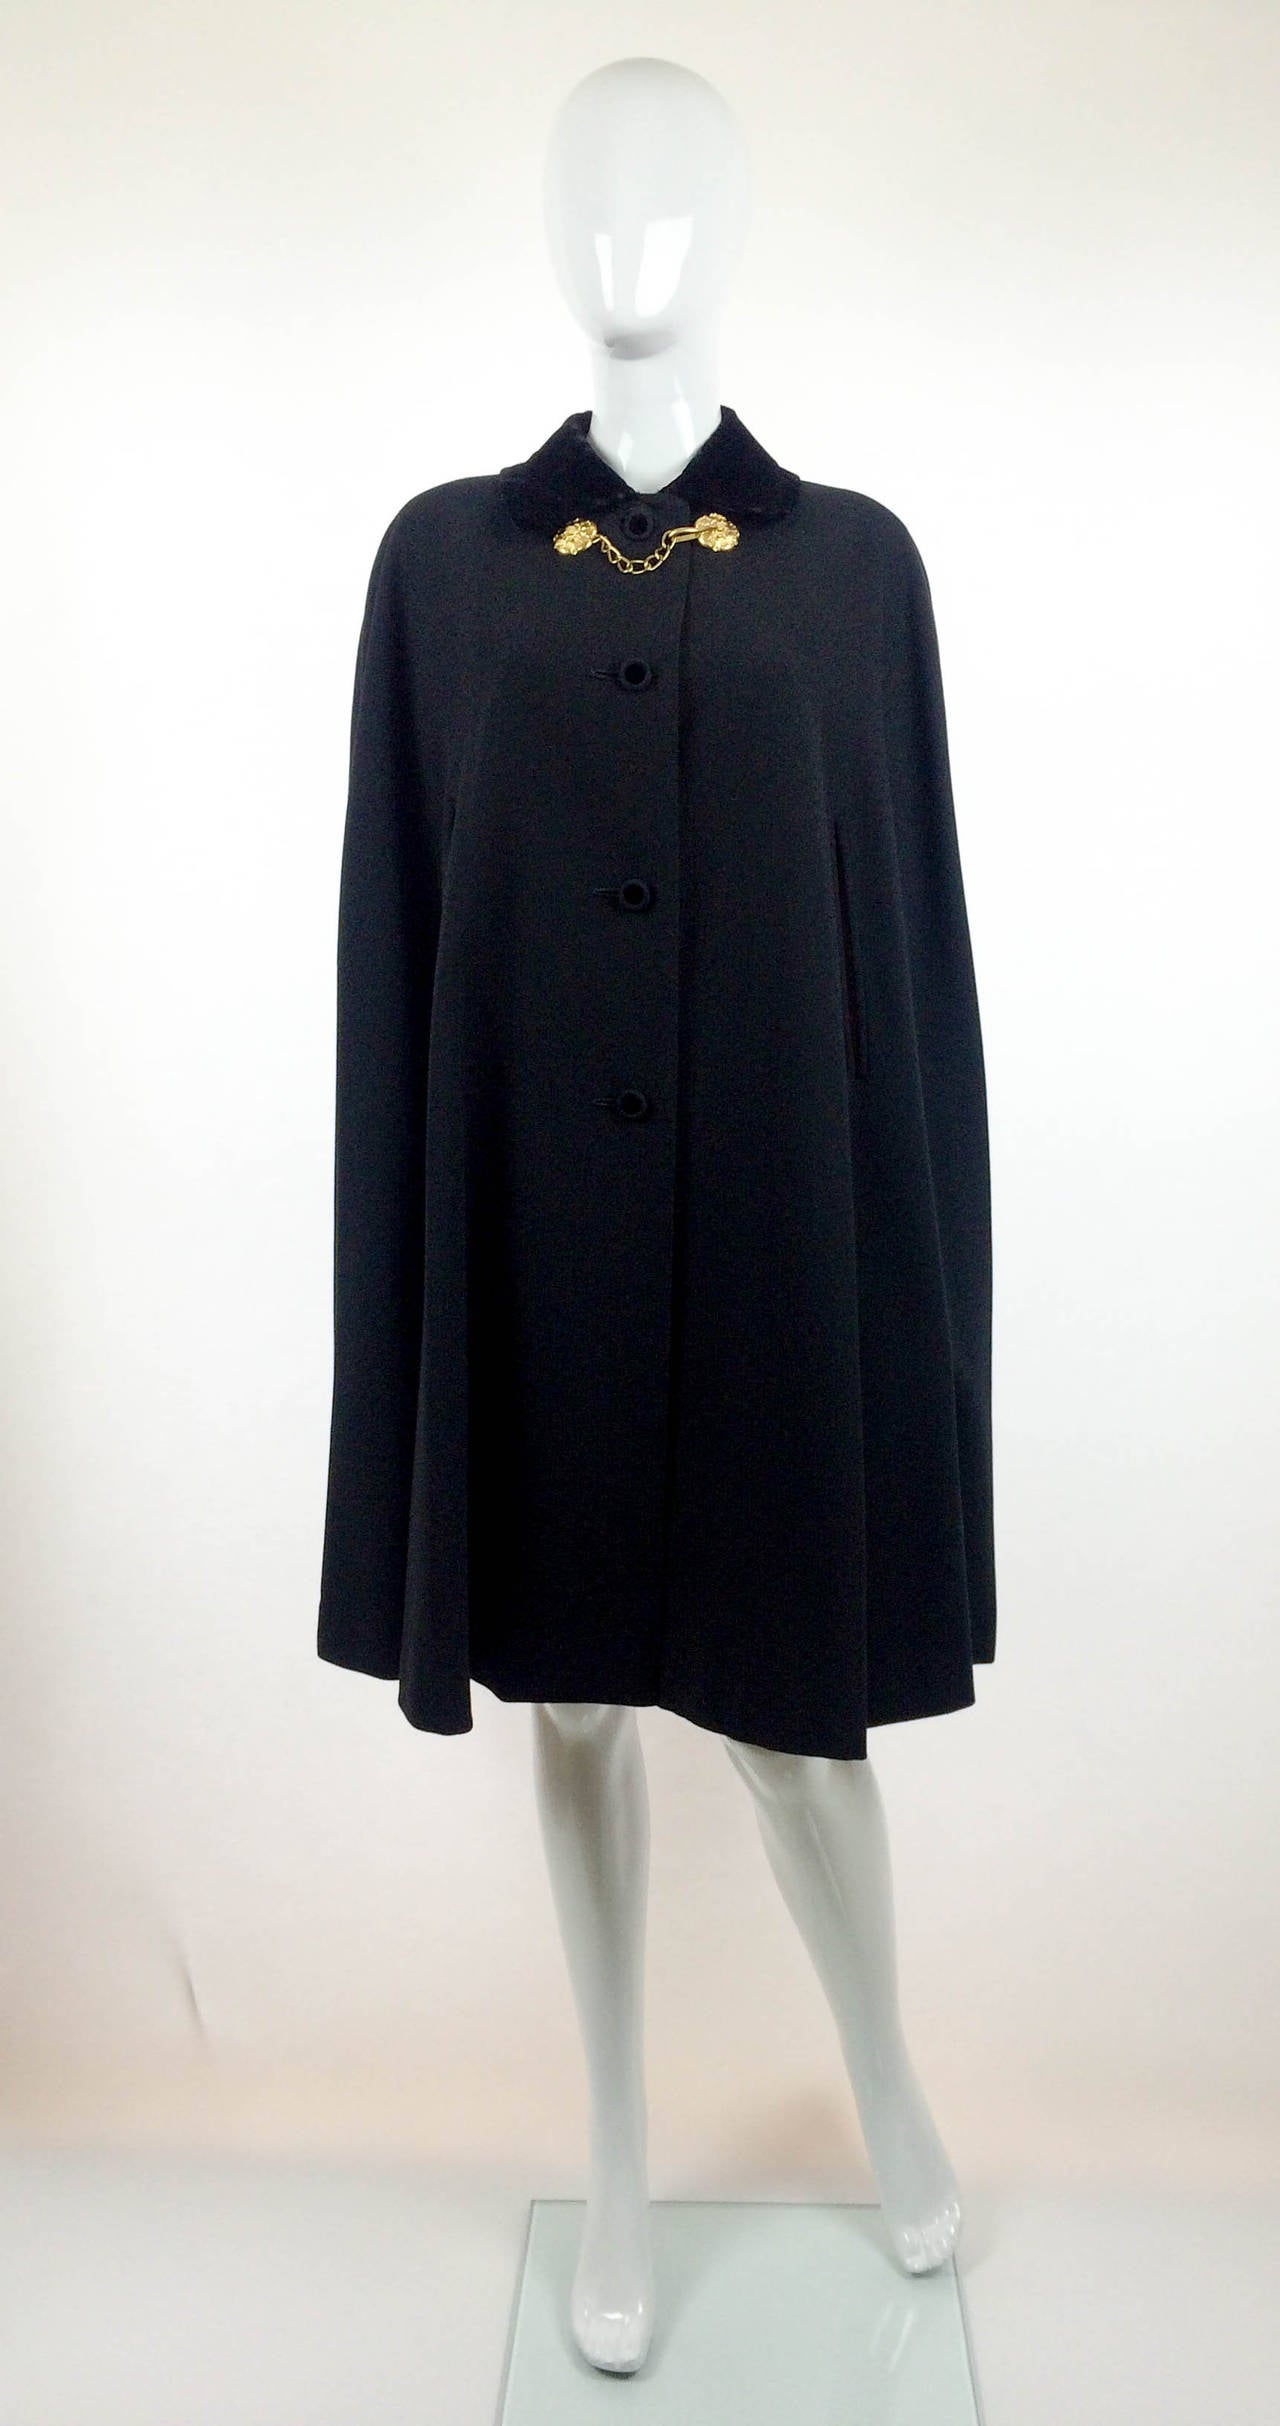 Stunning Vintage Rare Gieves Ltd Cape. The most accurate name for this beautiful piece is boat cloak. It is black, made of the finest wool with a velvet collar with openings/slits for the hands. There are 4 buttons down the front and an ornamental